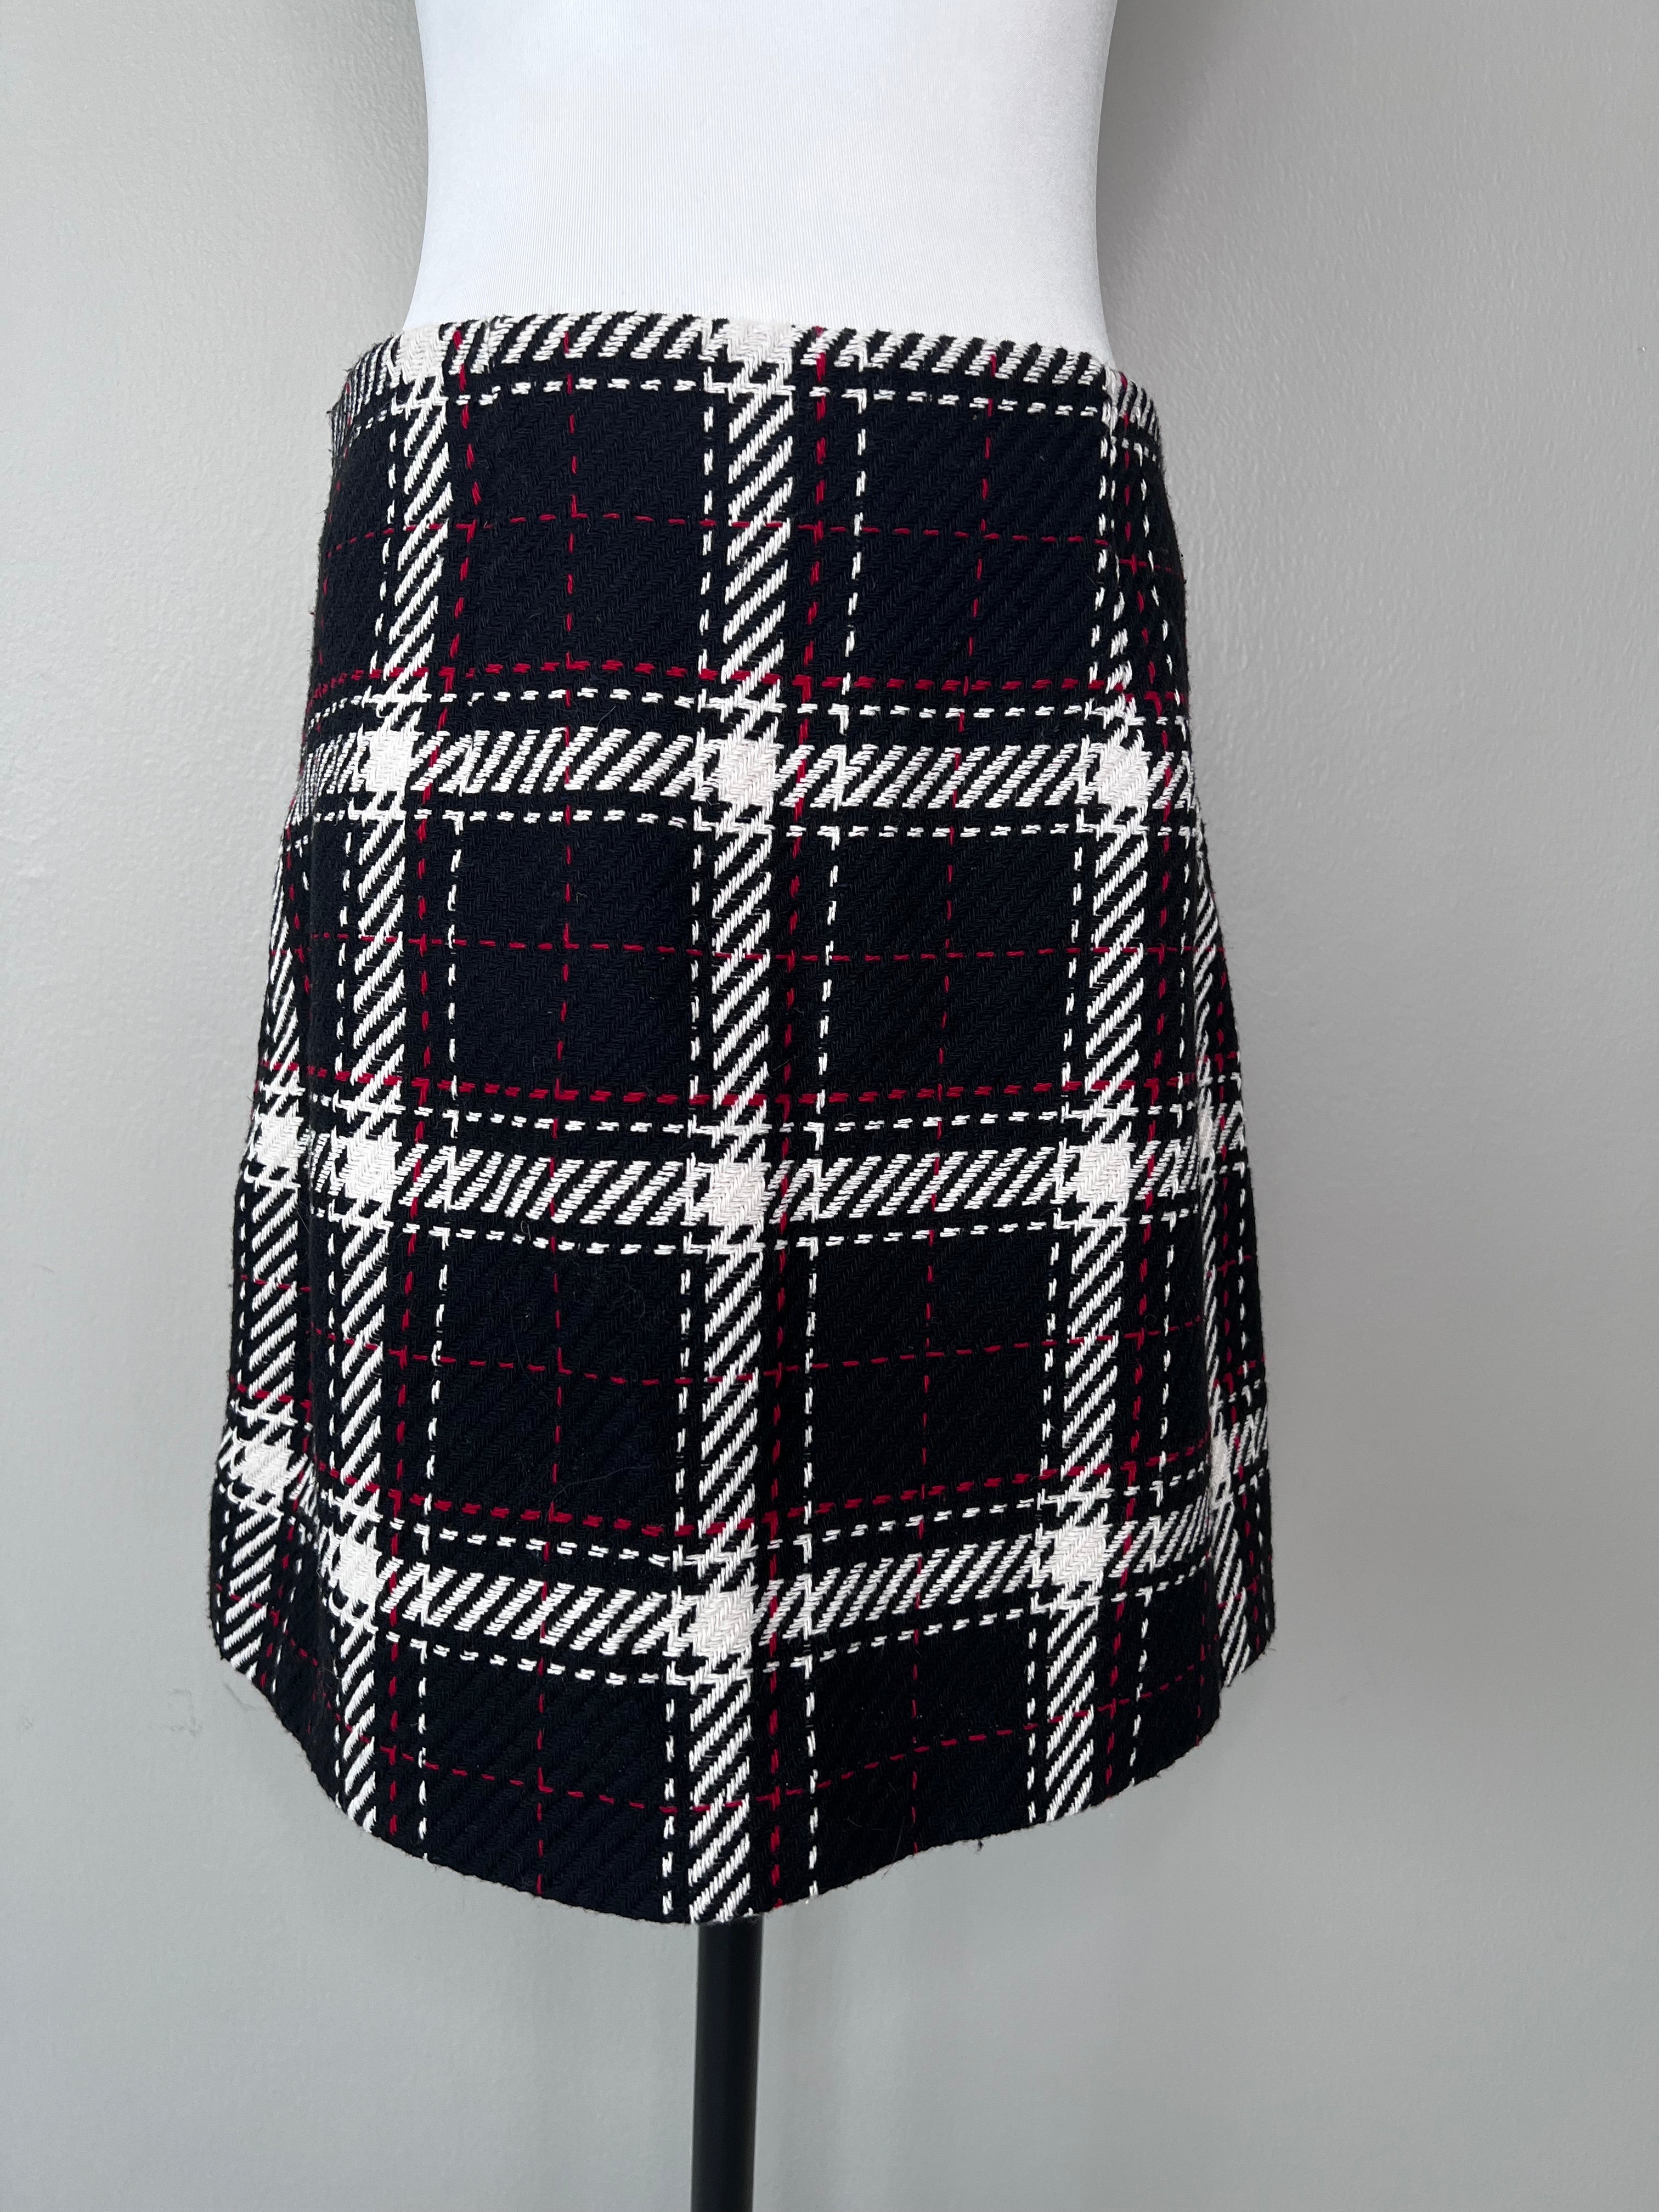 Plaid a-line skirt with front zipper - PRIMARK